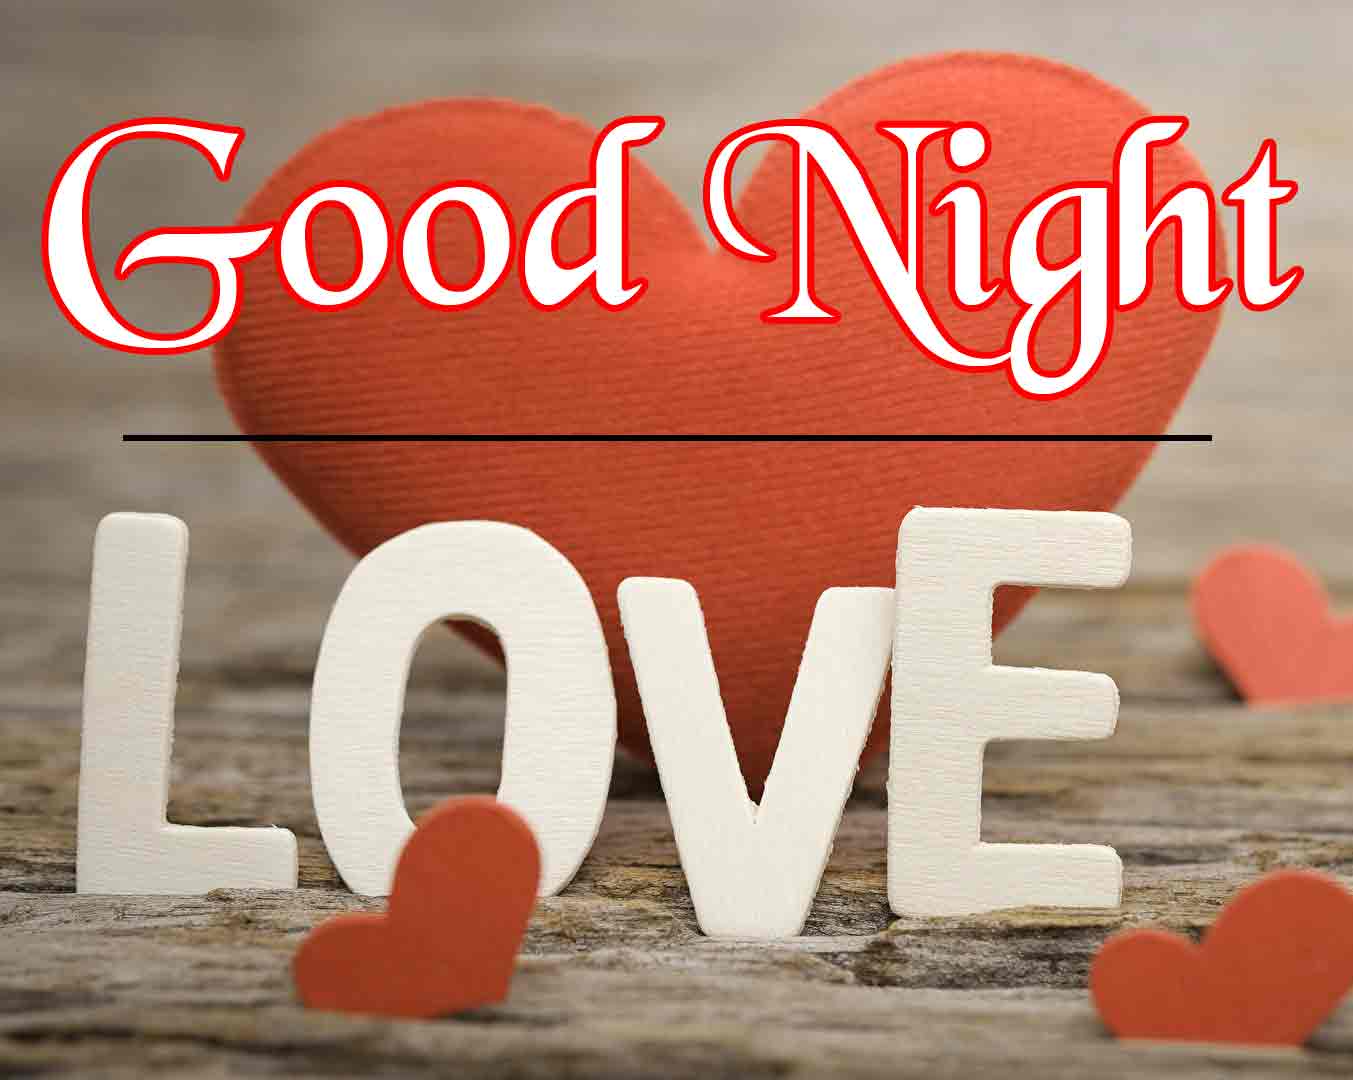 Love Couple Good Night Wallpaper Images Download 